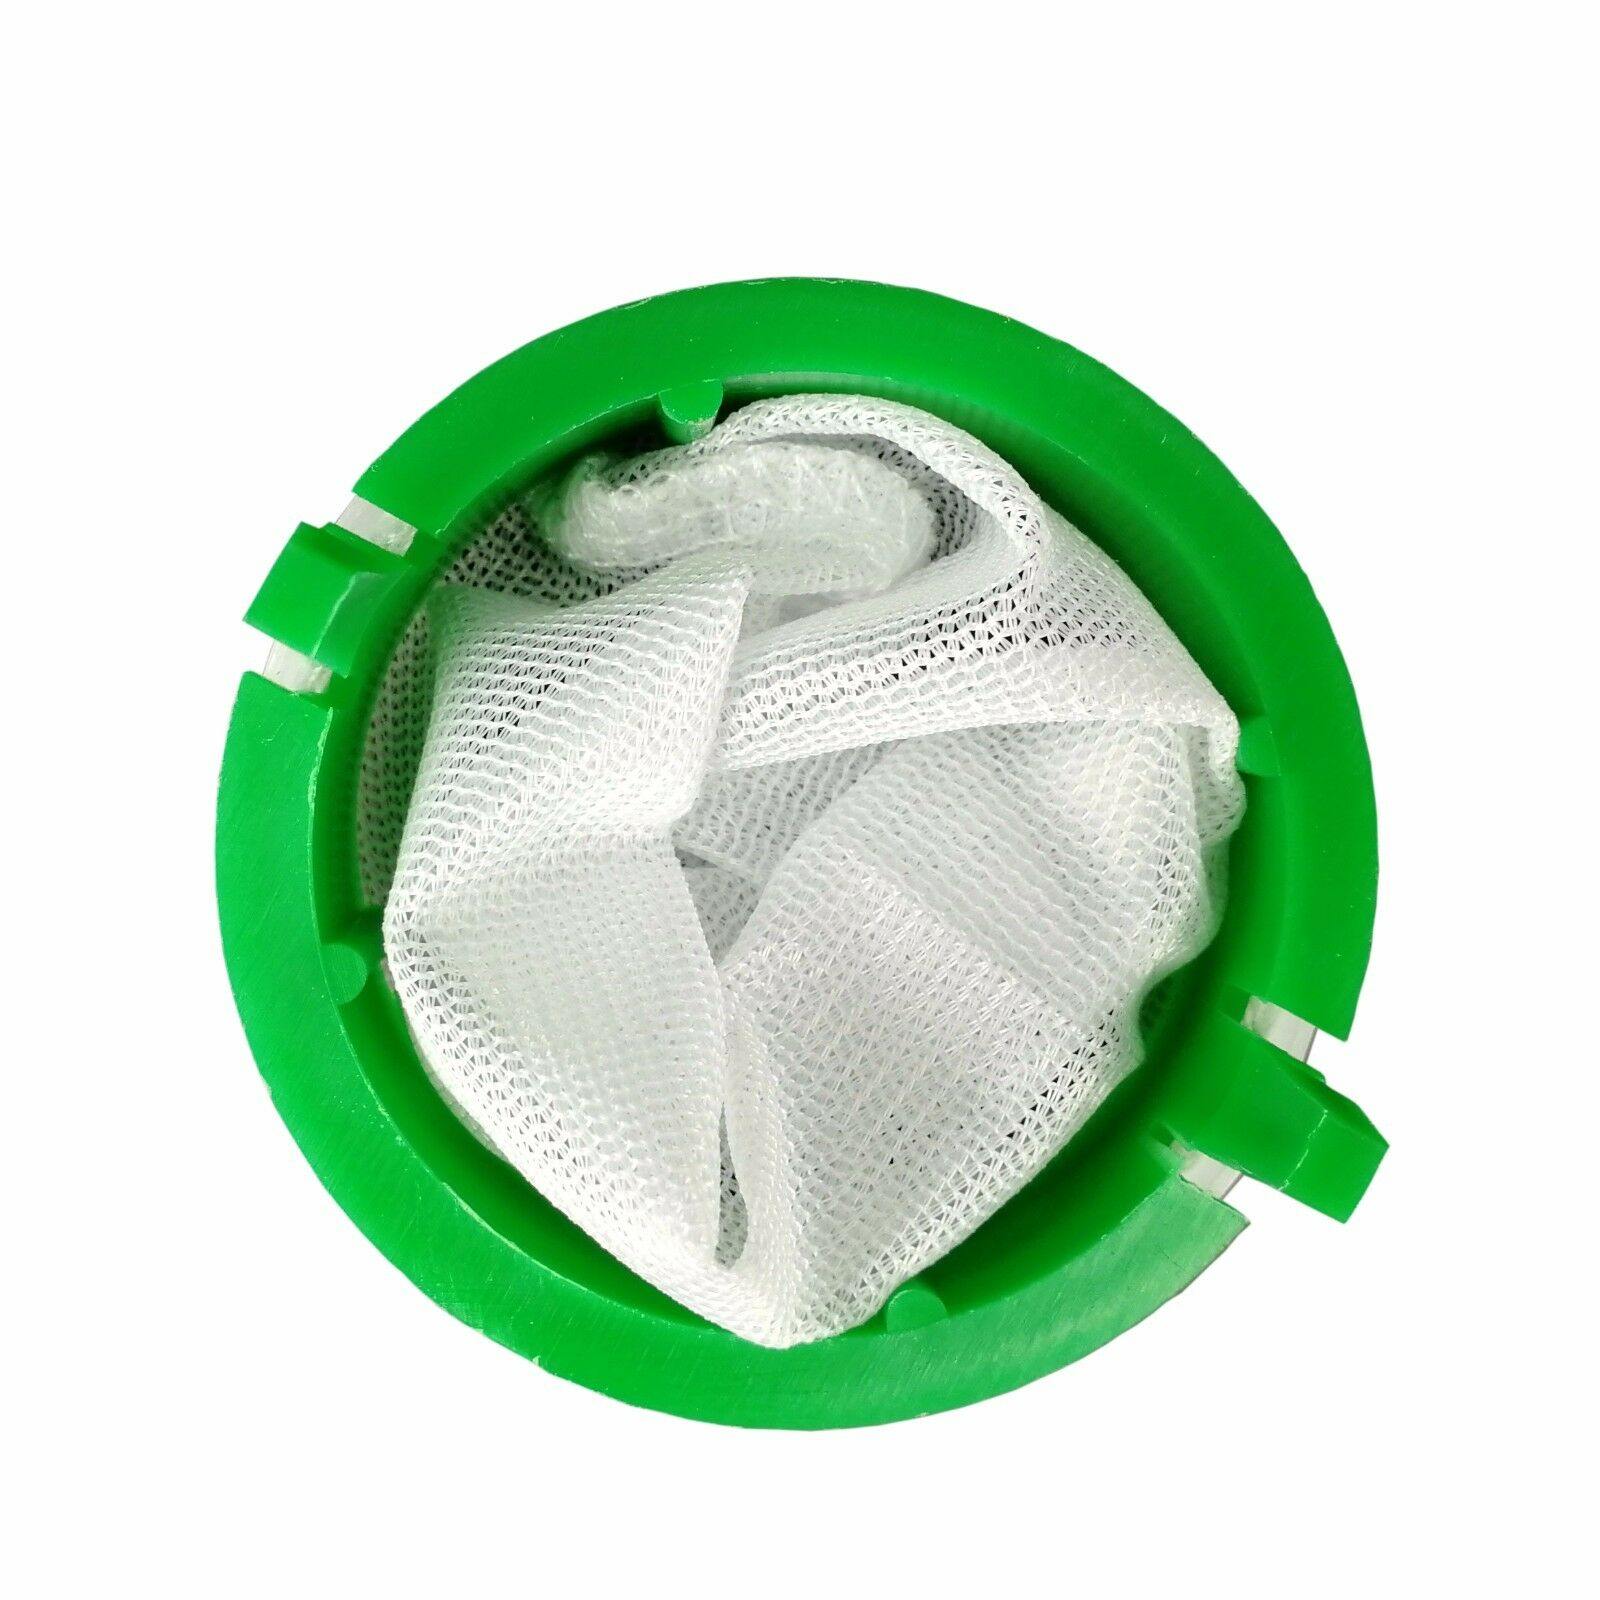 4X Washing Machine Lint Filter Bag For Electrolux Hoover 0081203001 0564257398 Sparesbarn